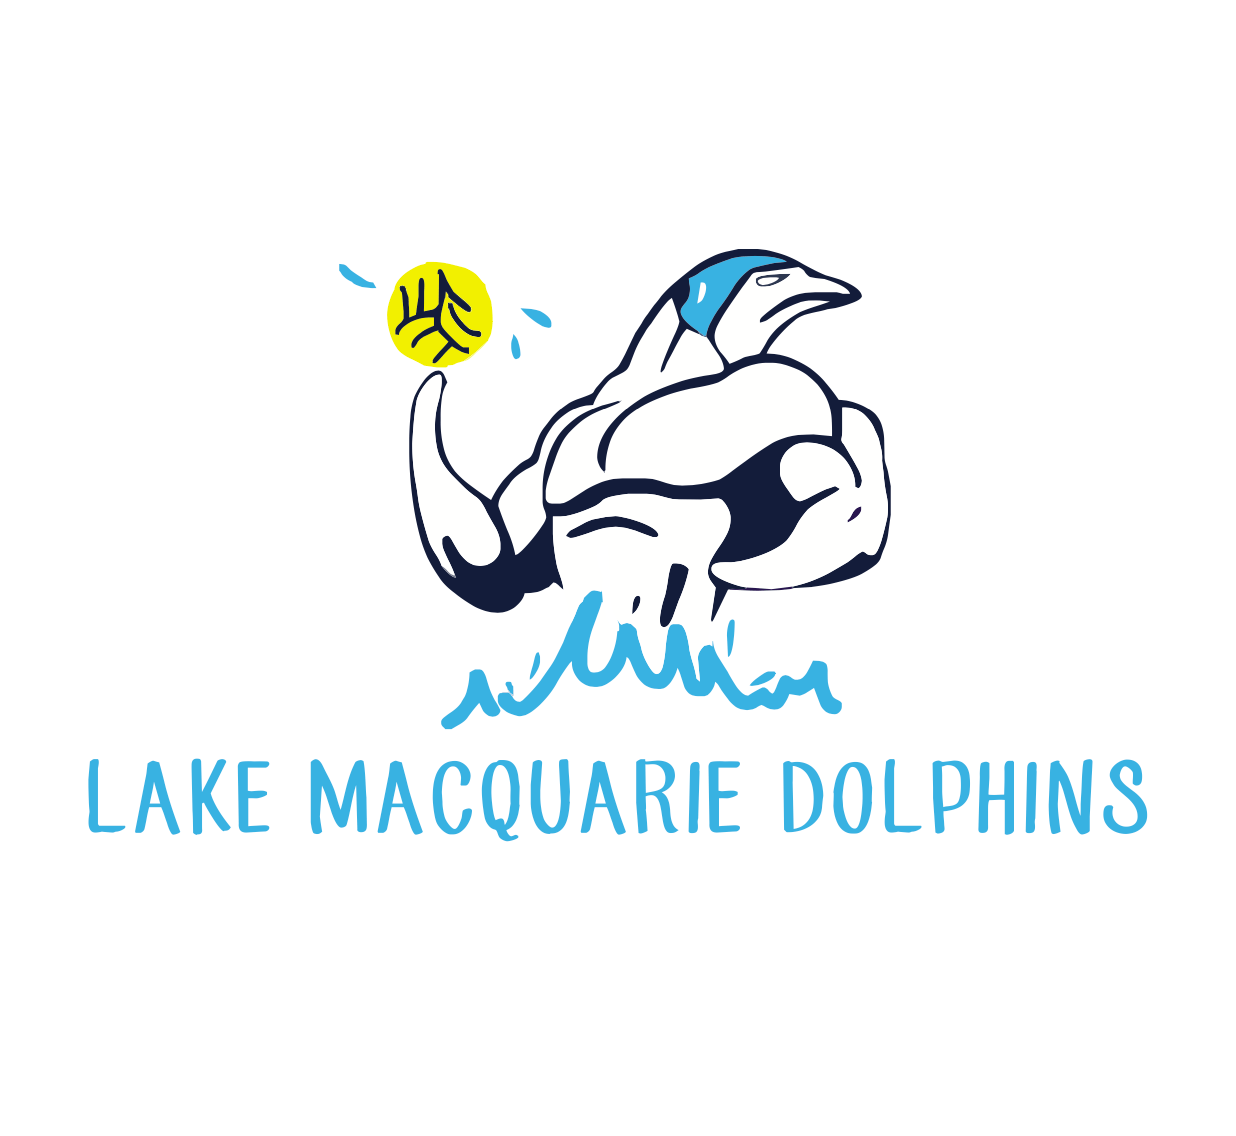 Lake Macquarie Dolphins - The Good Human Factory